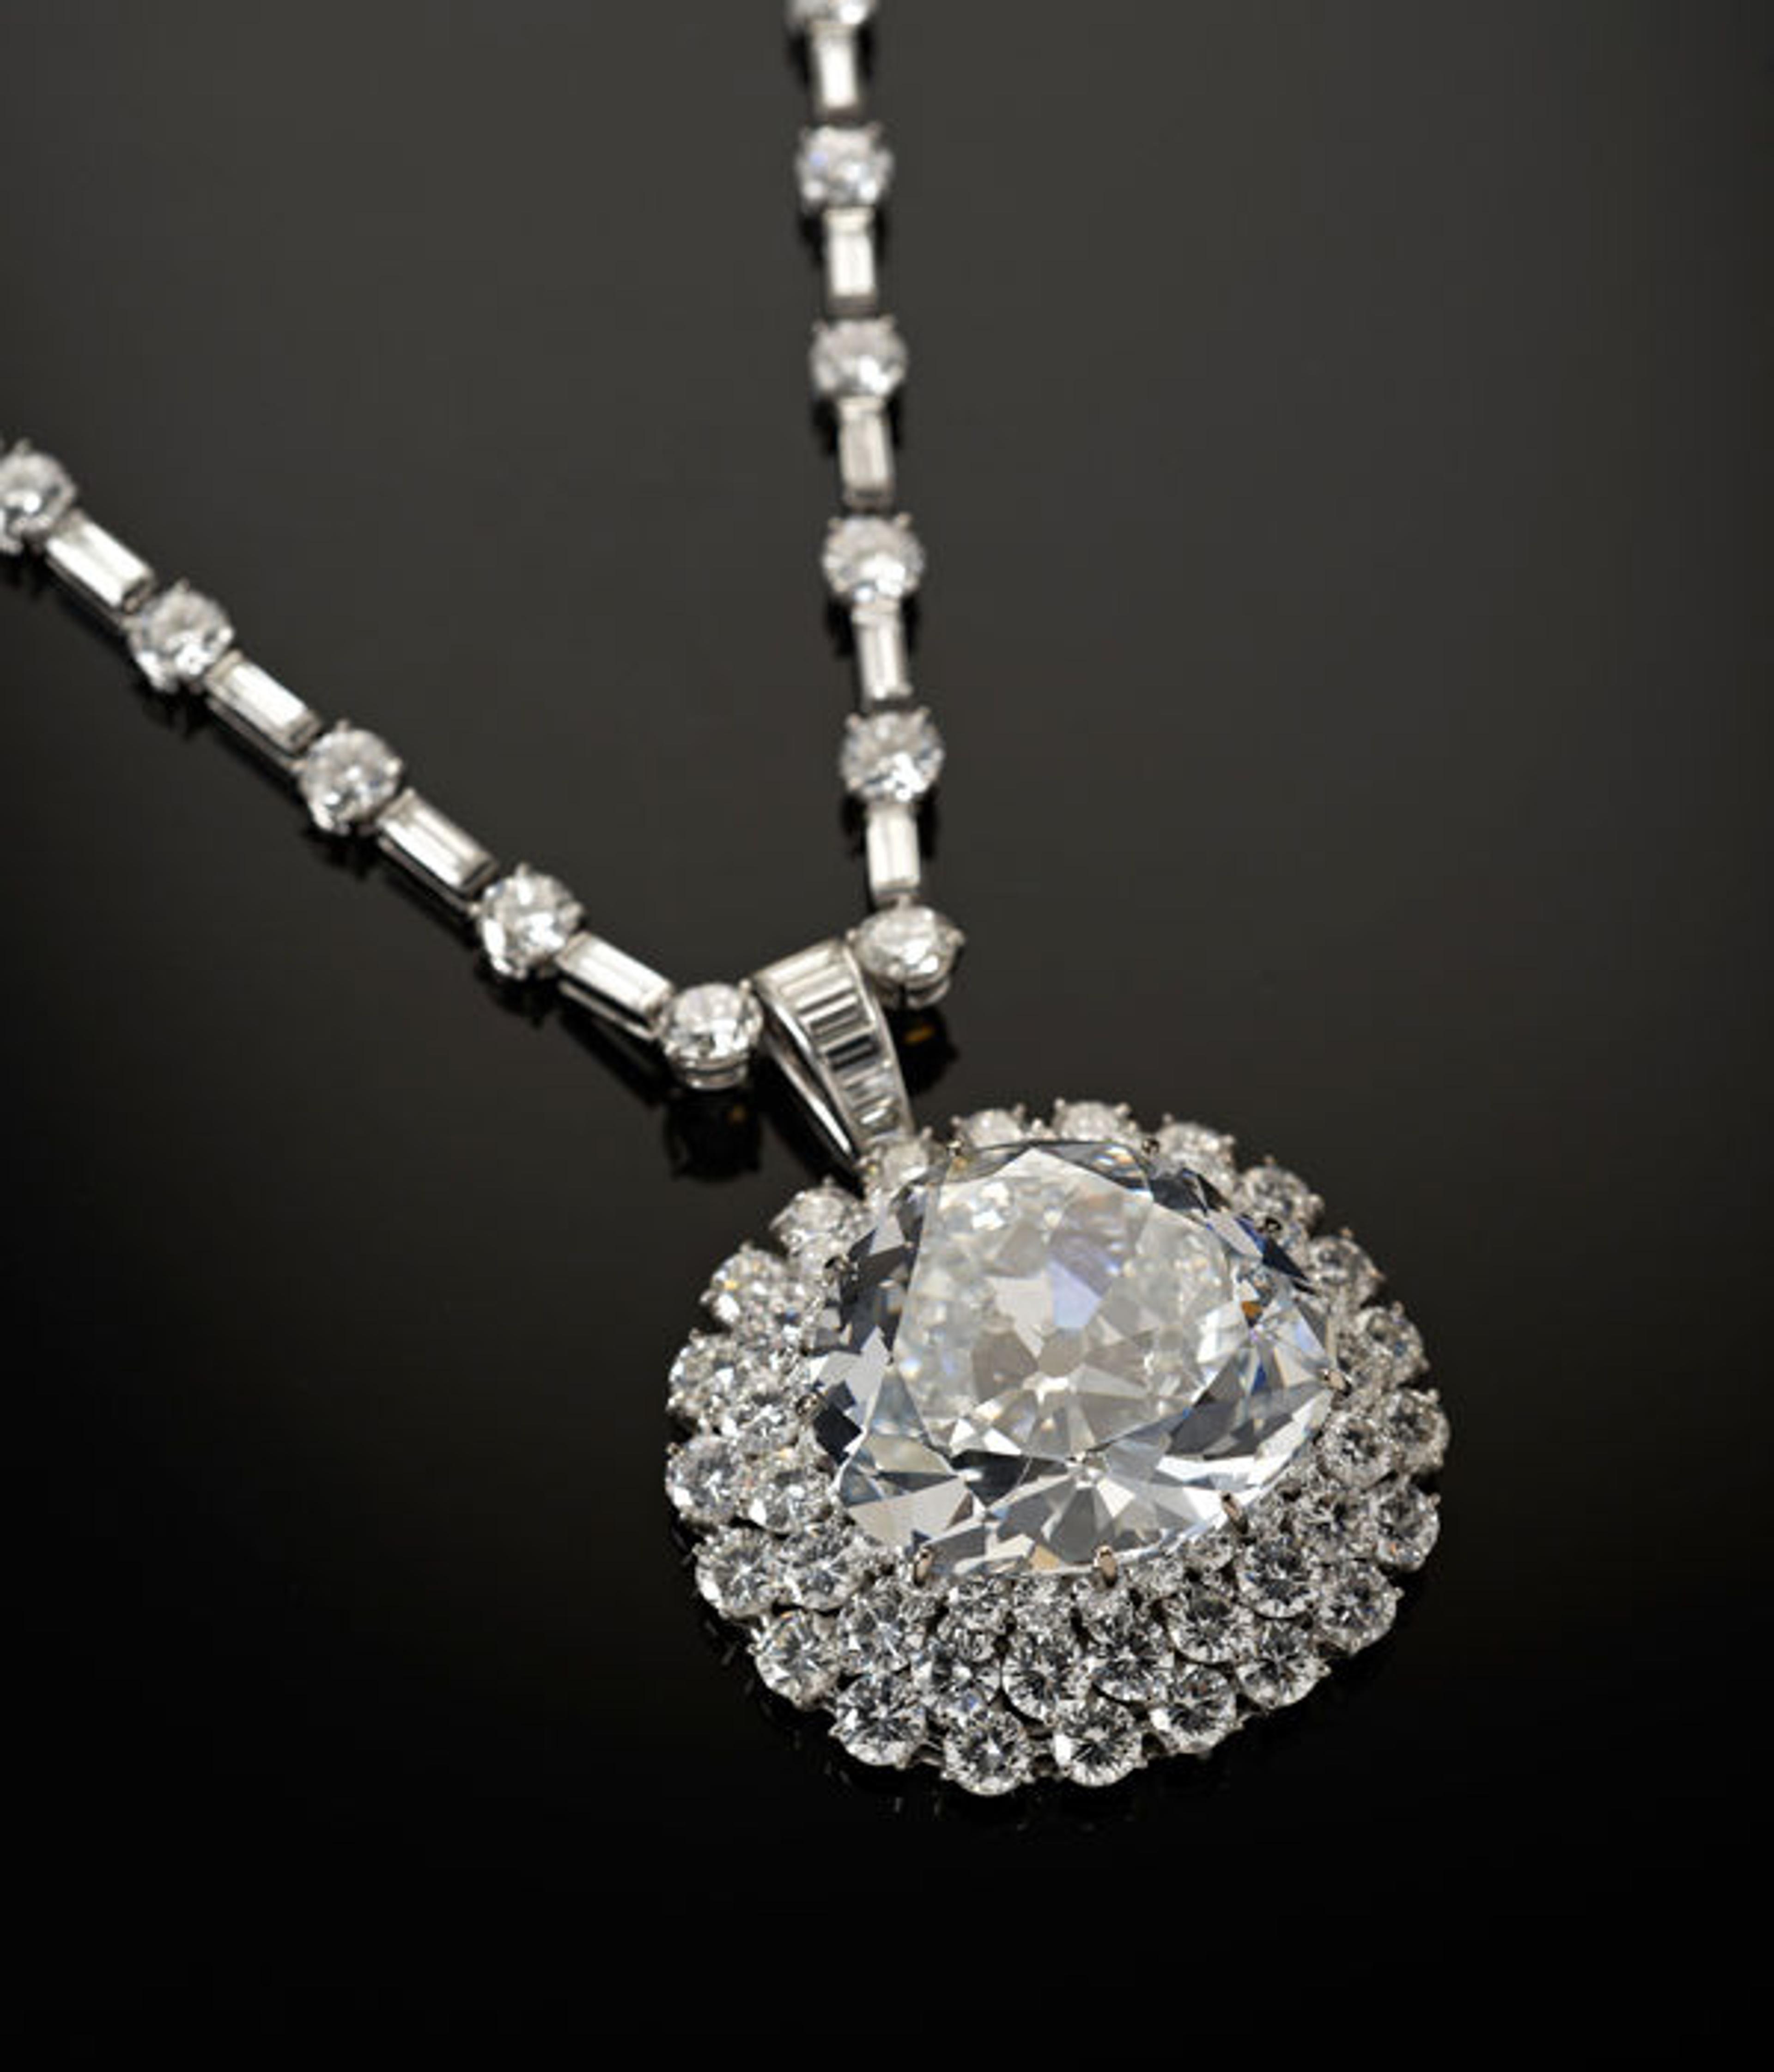 "Idol's Eye" diamond with Harry Winston necklace, Diamond: early 17th century; Necklace: mid-20th century. Islamic. 70.21 carats. The Al-Thani Collection